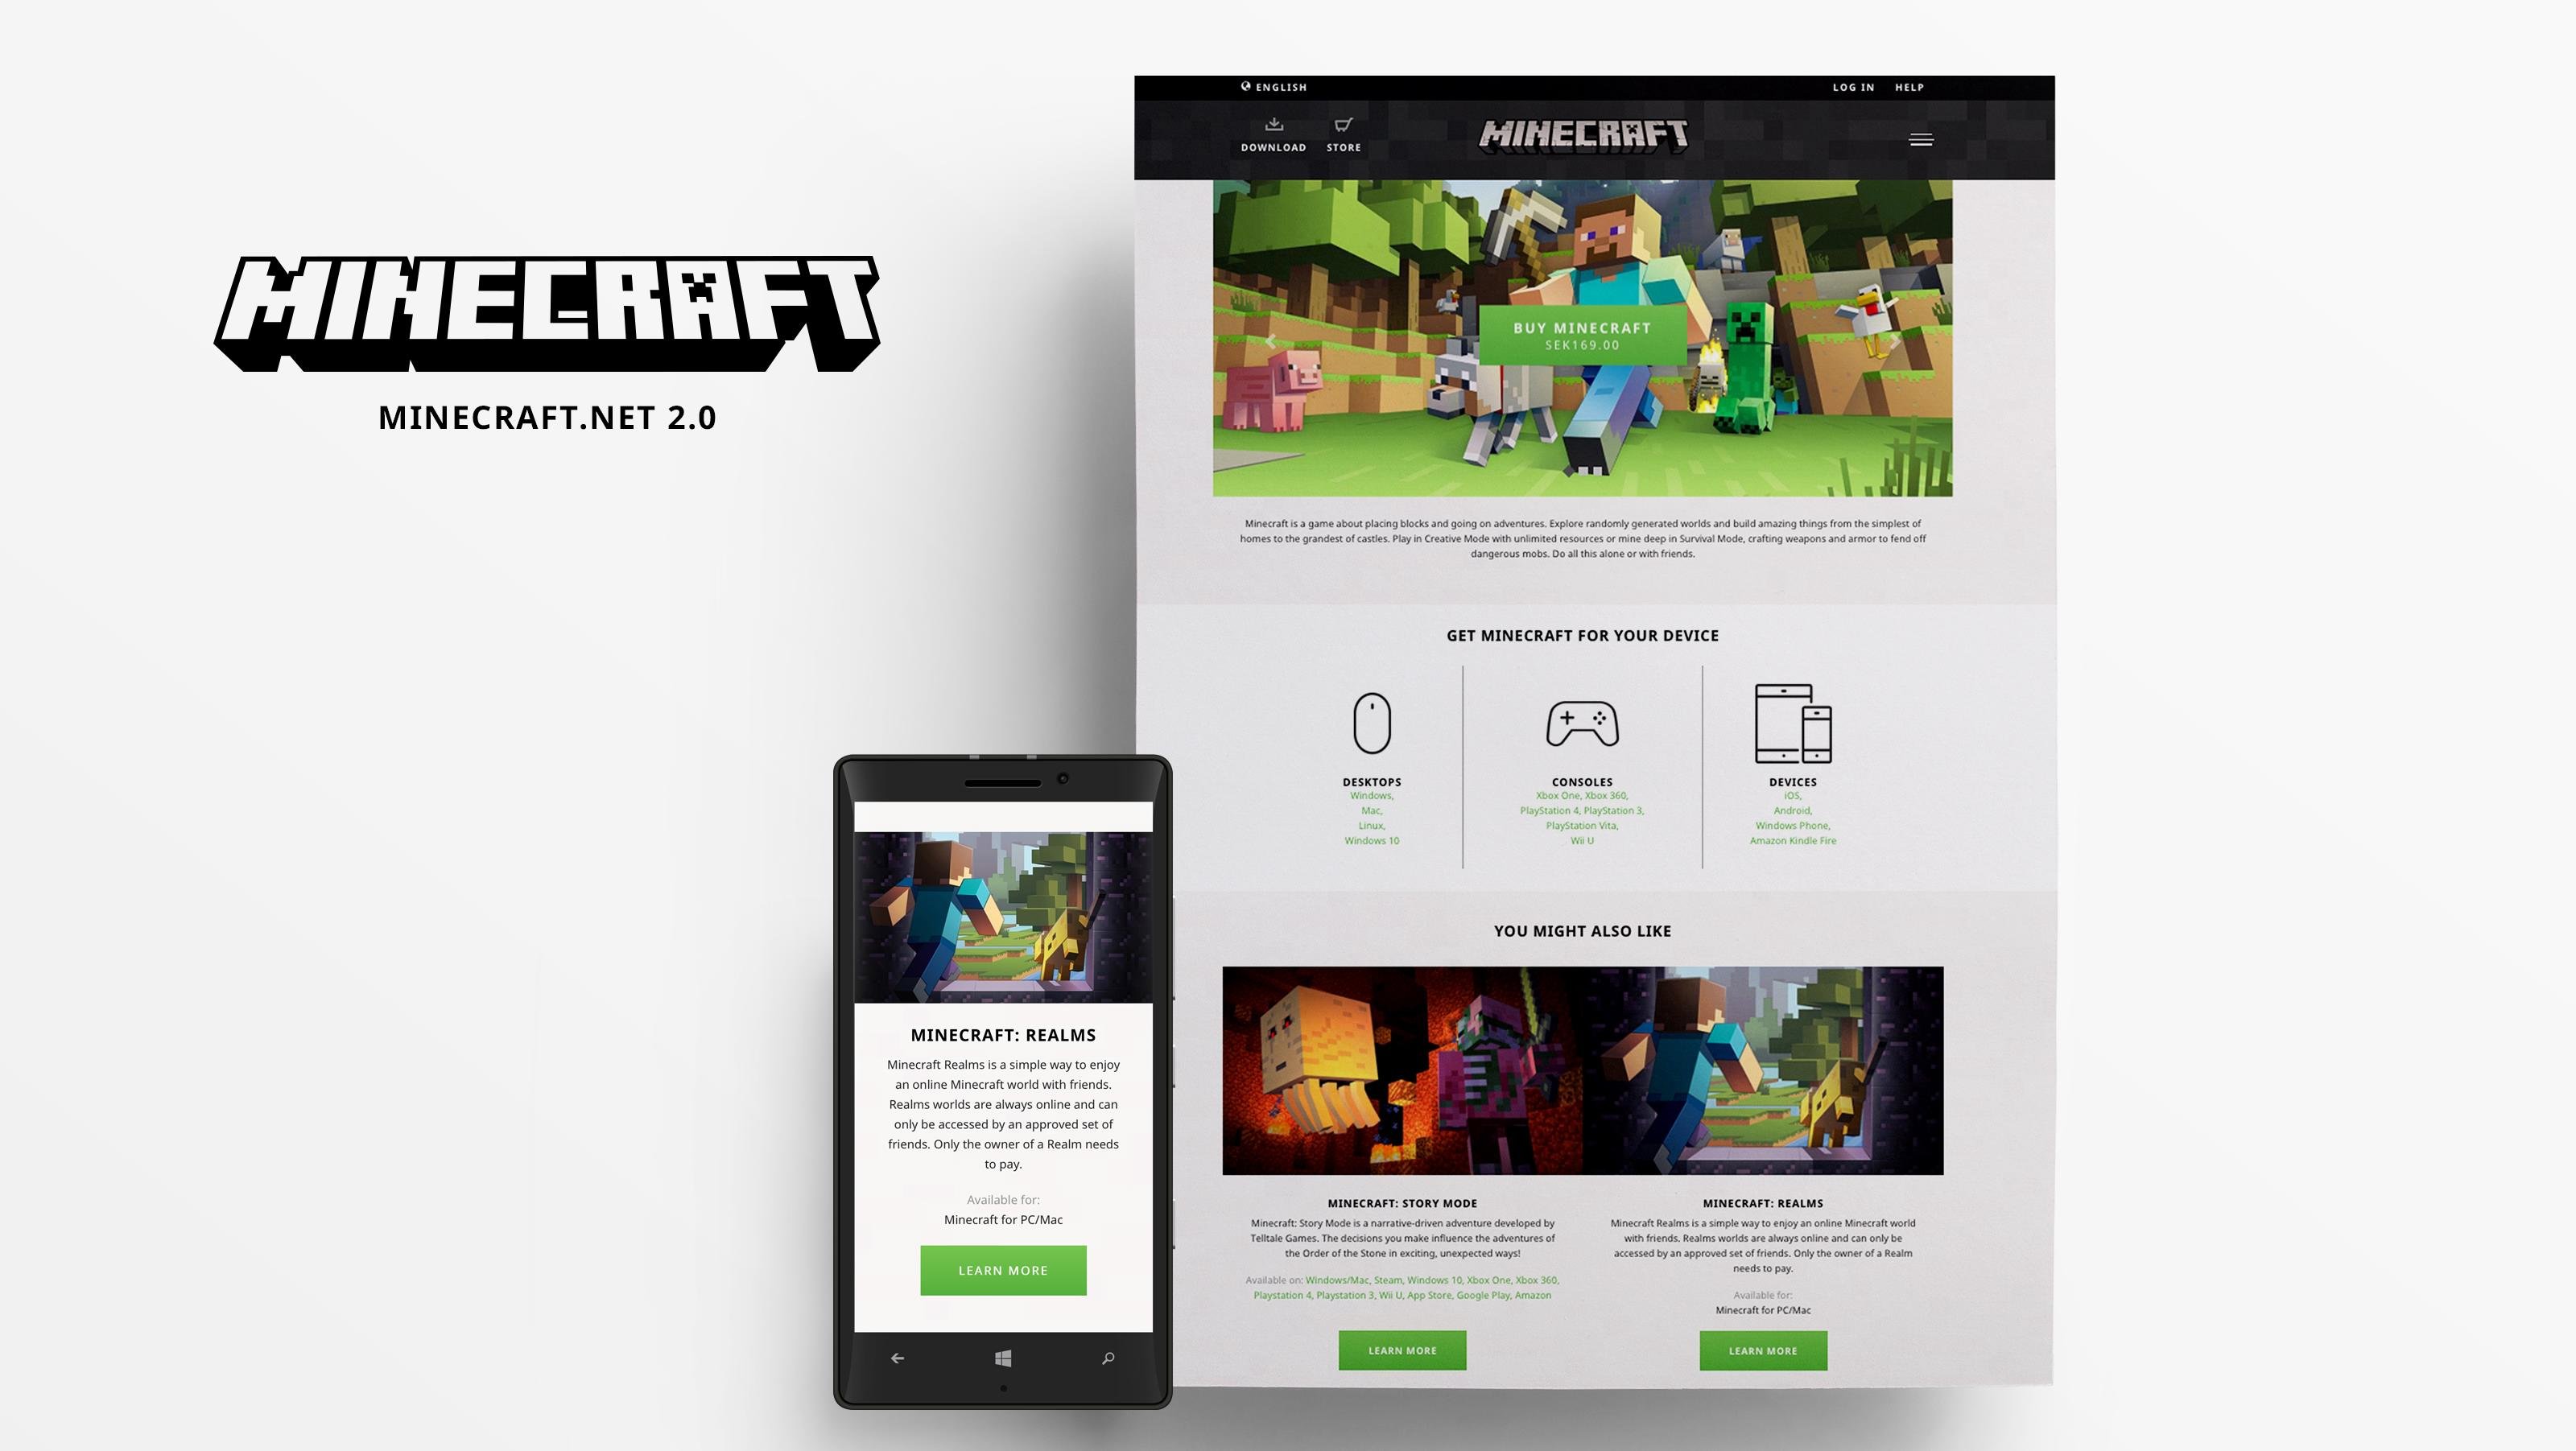 Mojang launches updated Minecraft.net website